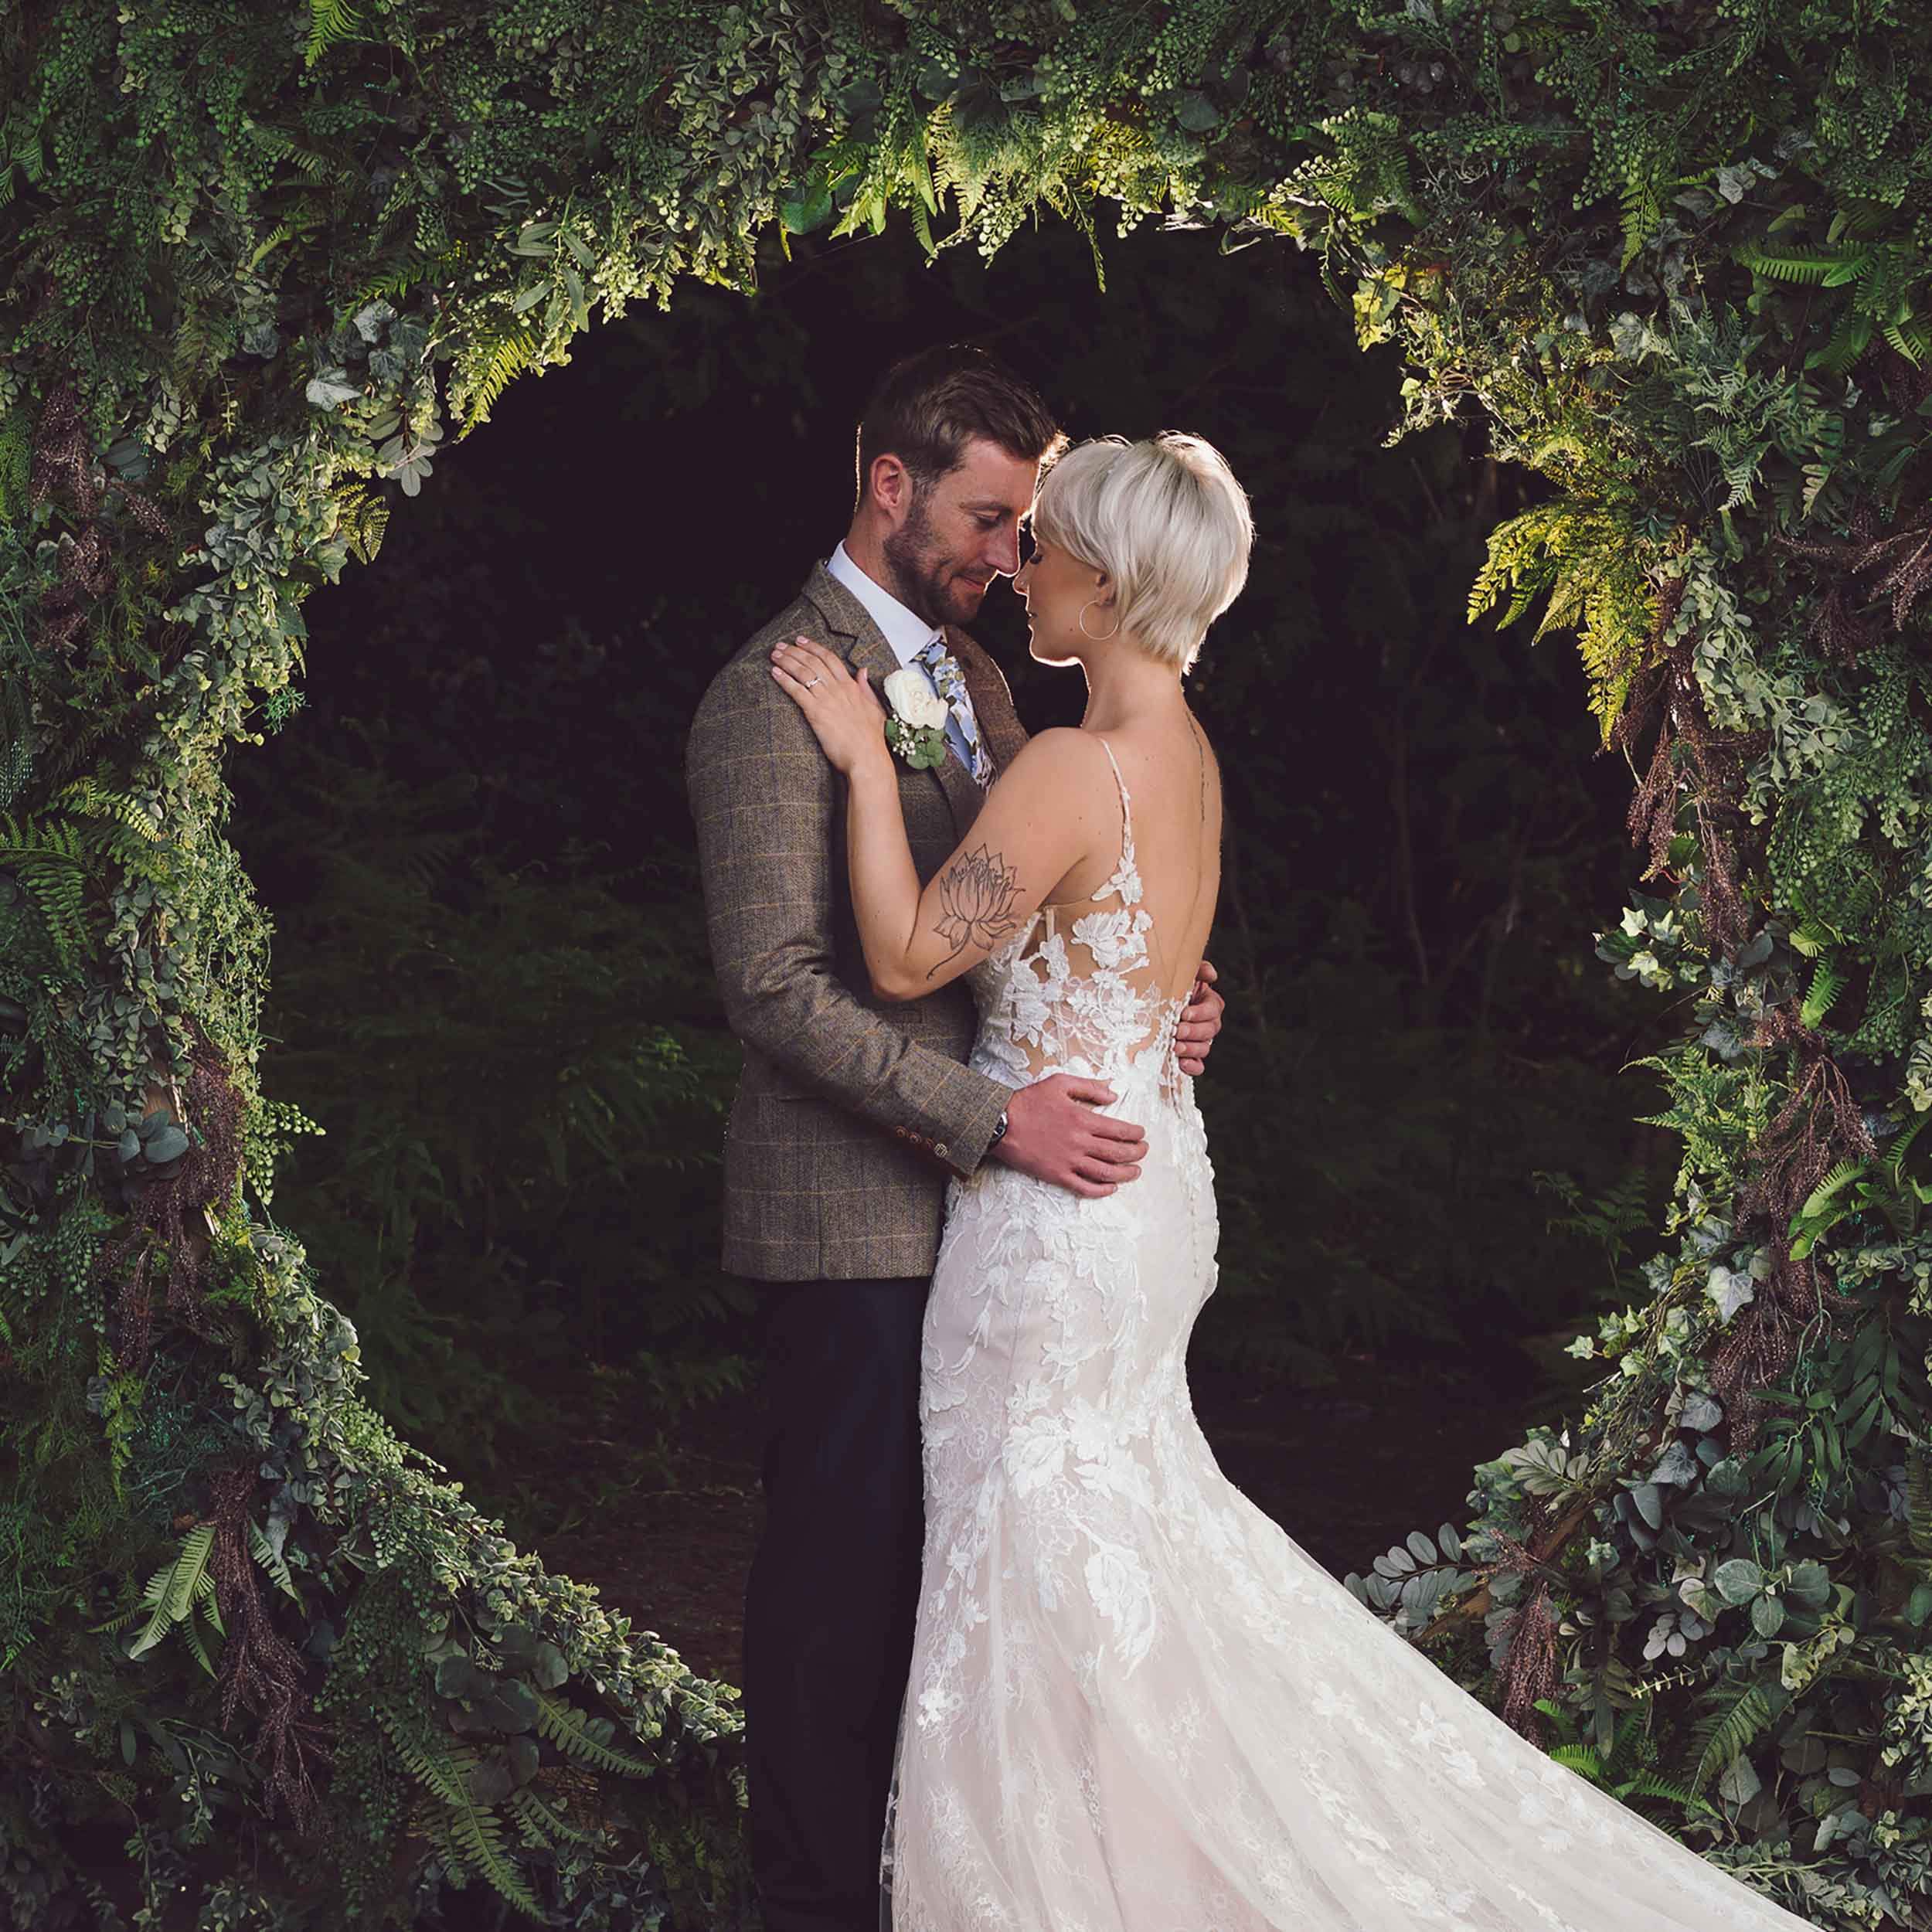 Bride & Groom embrace in front of foliage circle at Chester woodland weddings